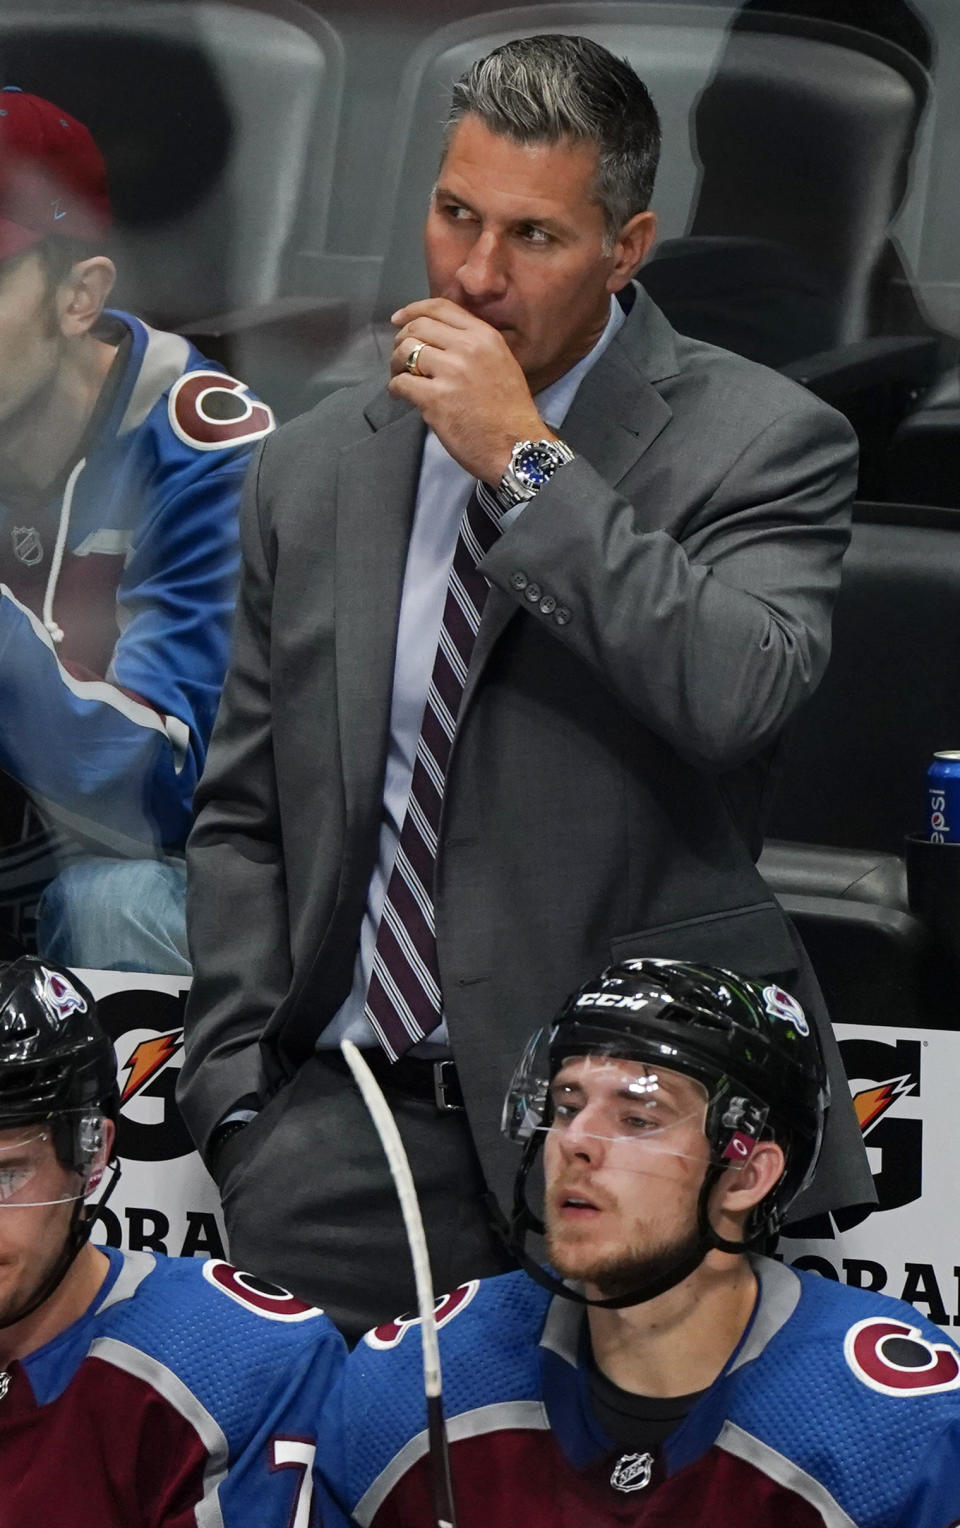 Colorado Avalanche coach Jared Bednar reacts to a call during the third period of the team's preseason NHL hockey game against the Vegas Golden Knights, Tuesday, Sept. 17, 2019, in Denver. (AP Photo/Jack Dempsey)